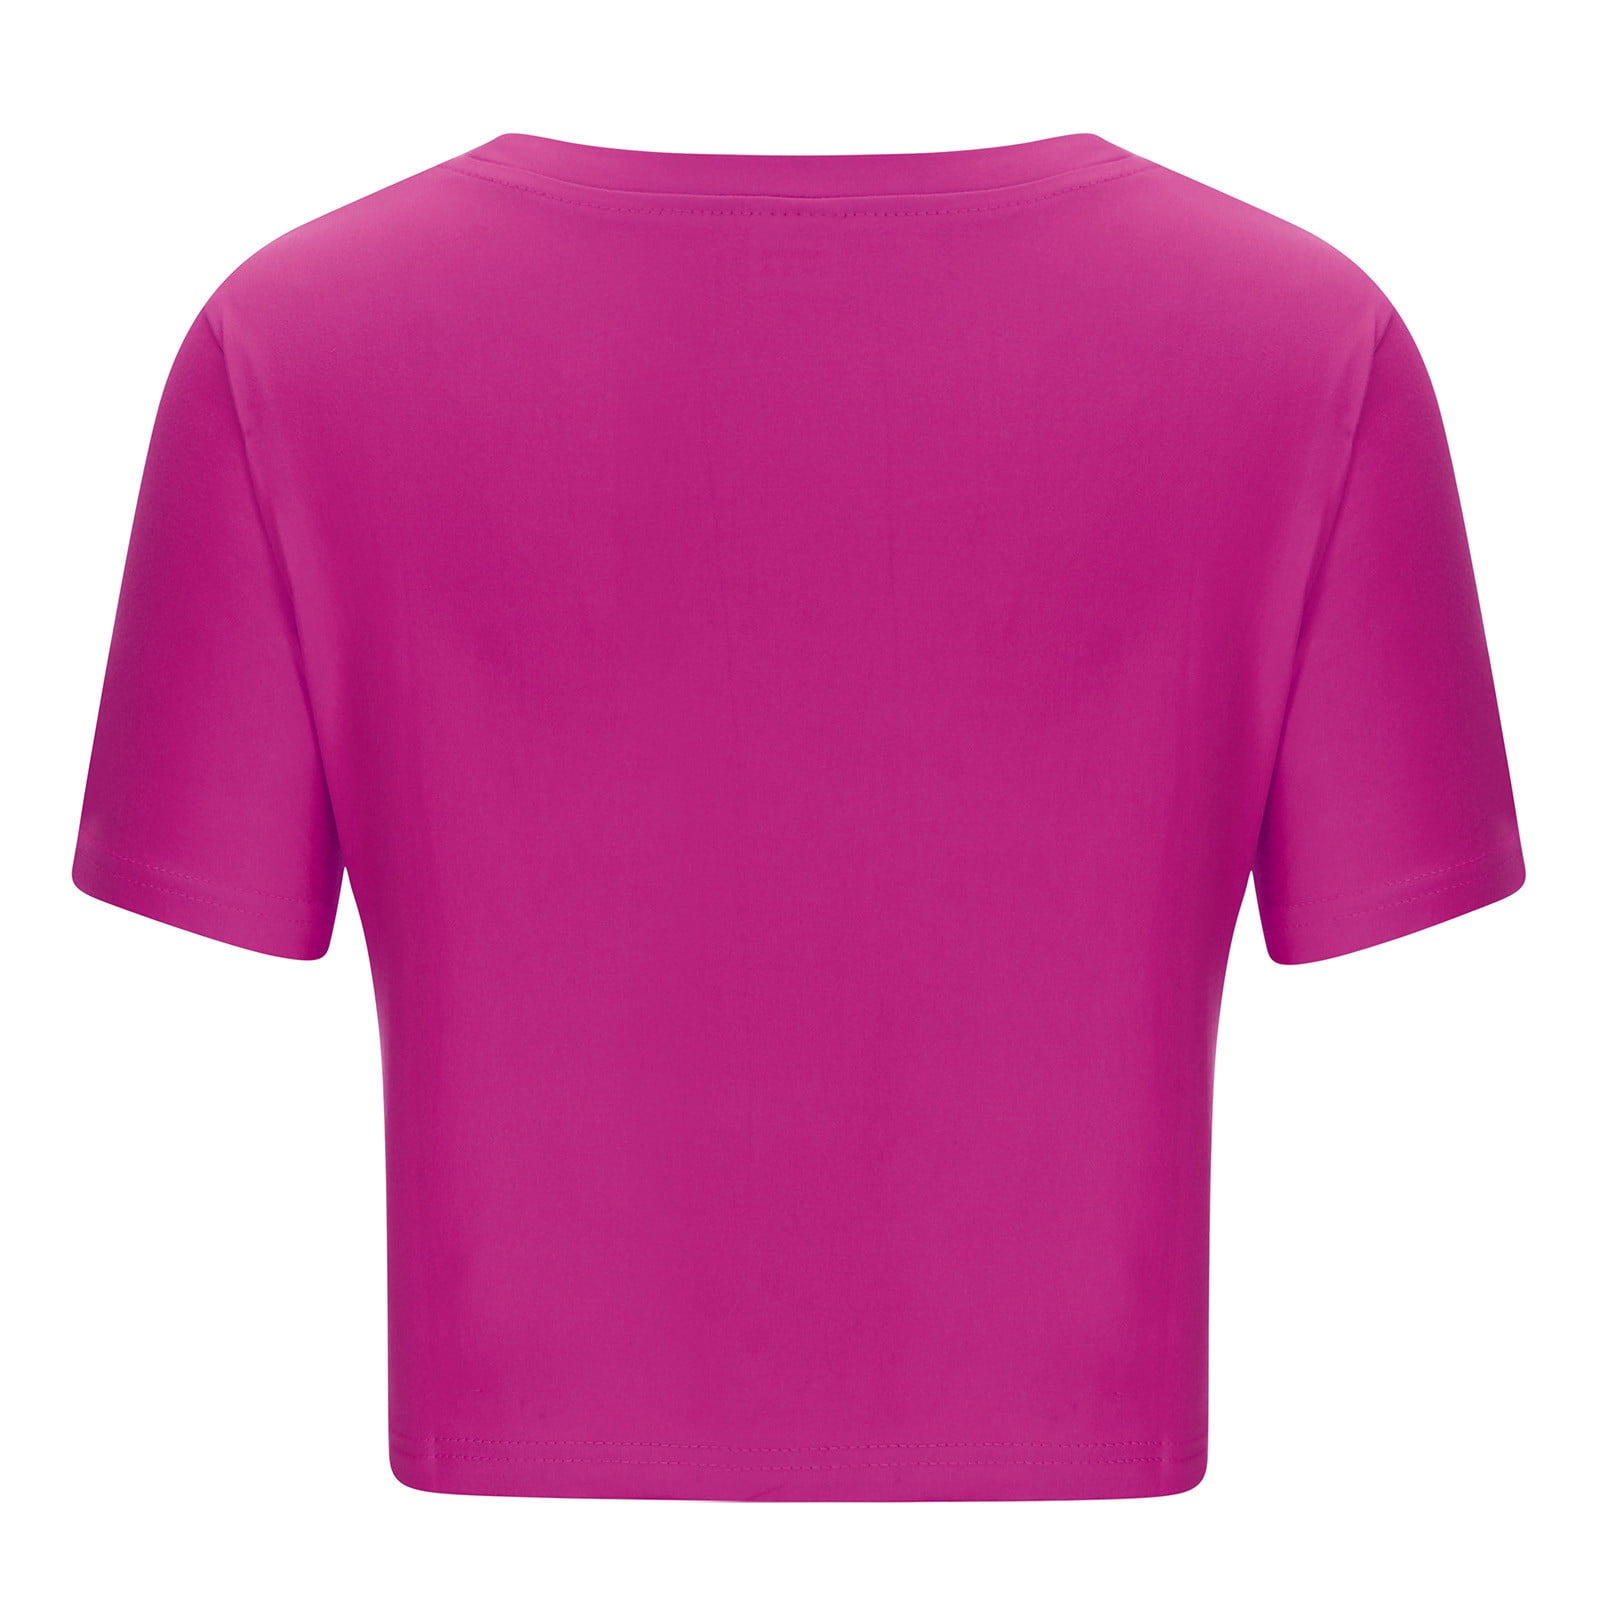 RQYYD Clearance Women's Workout Short Sleeve Crewneck Shirts Candy Color  Loose Crop Tops Athletic Gym Shirt Casual Cropped T-Shirt(Hot Pink,XL) 